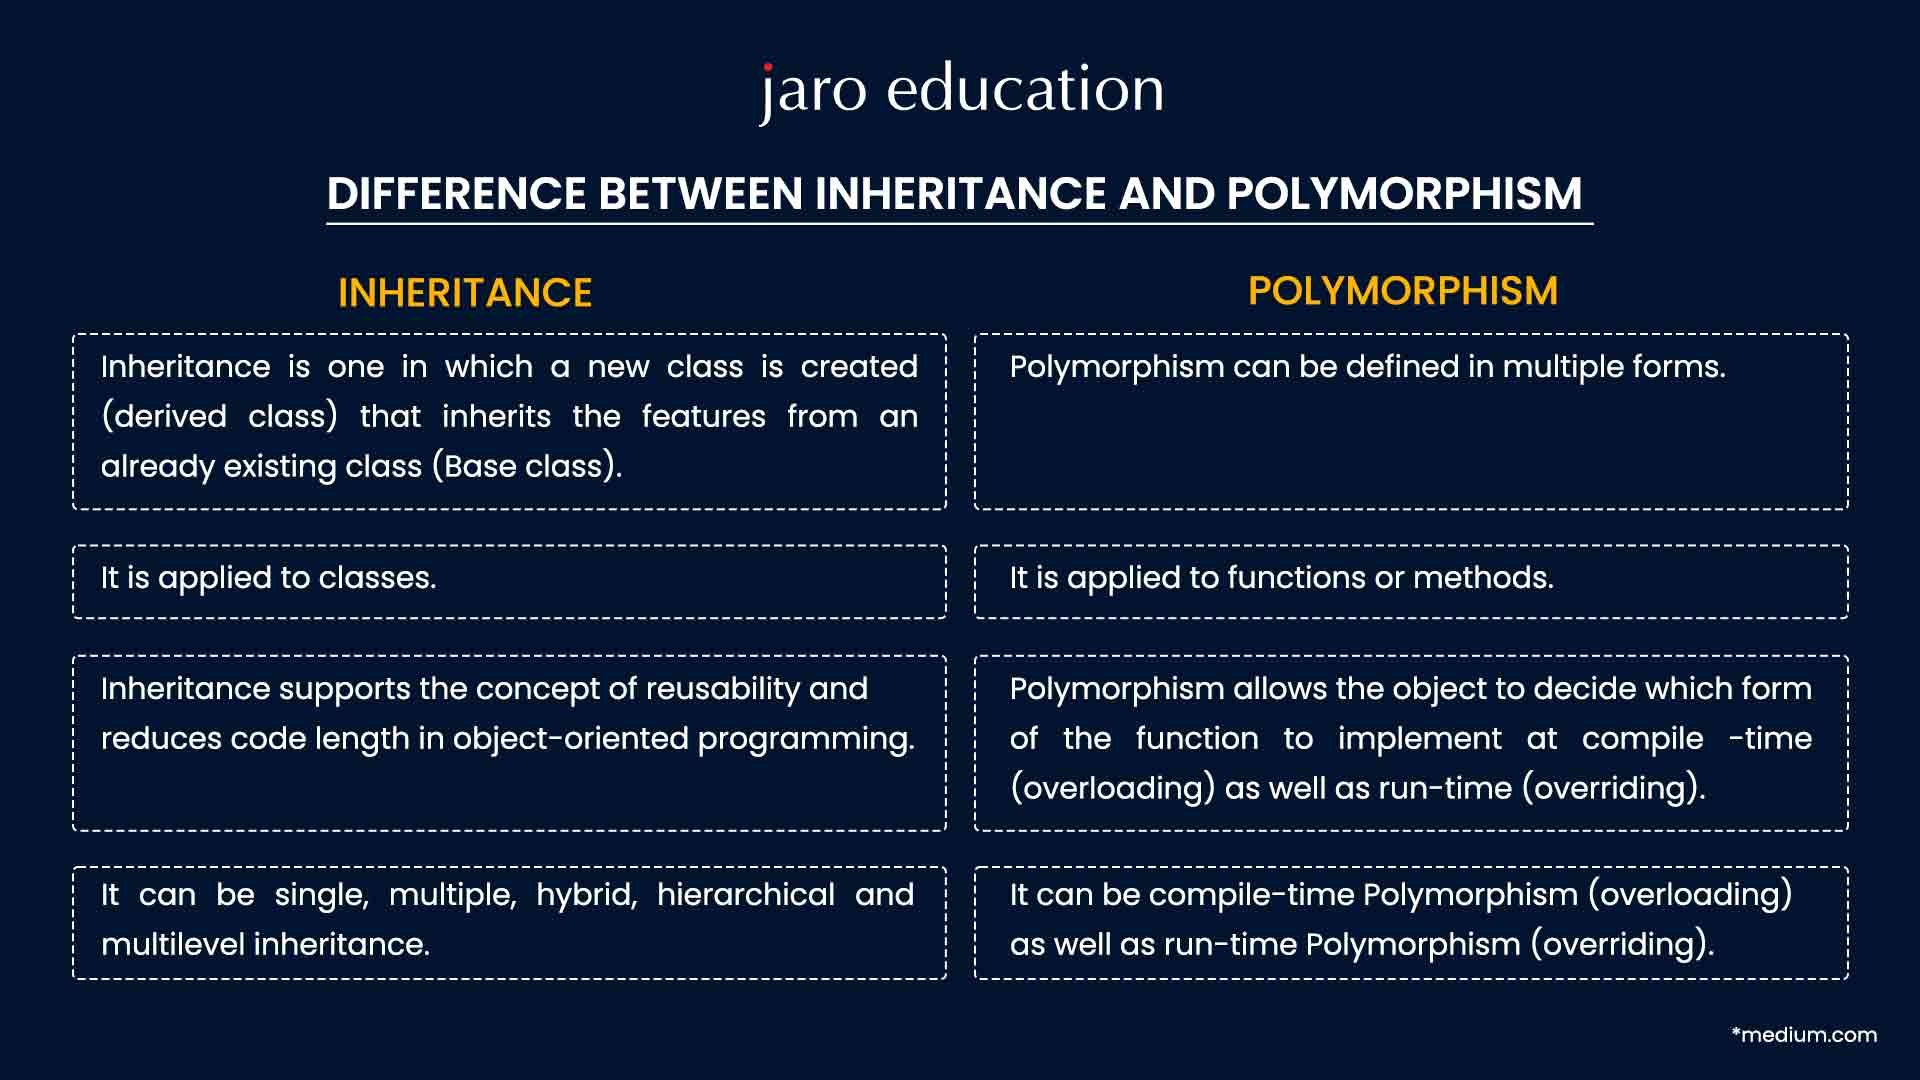 Difference Between Inheritance and Polymorphism